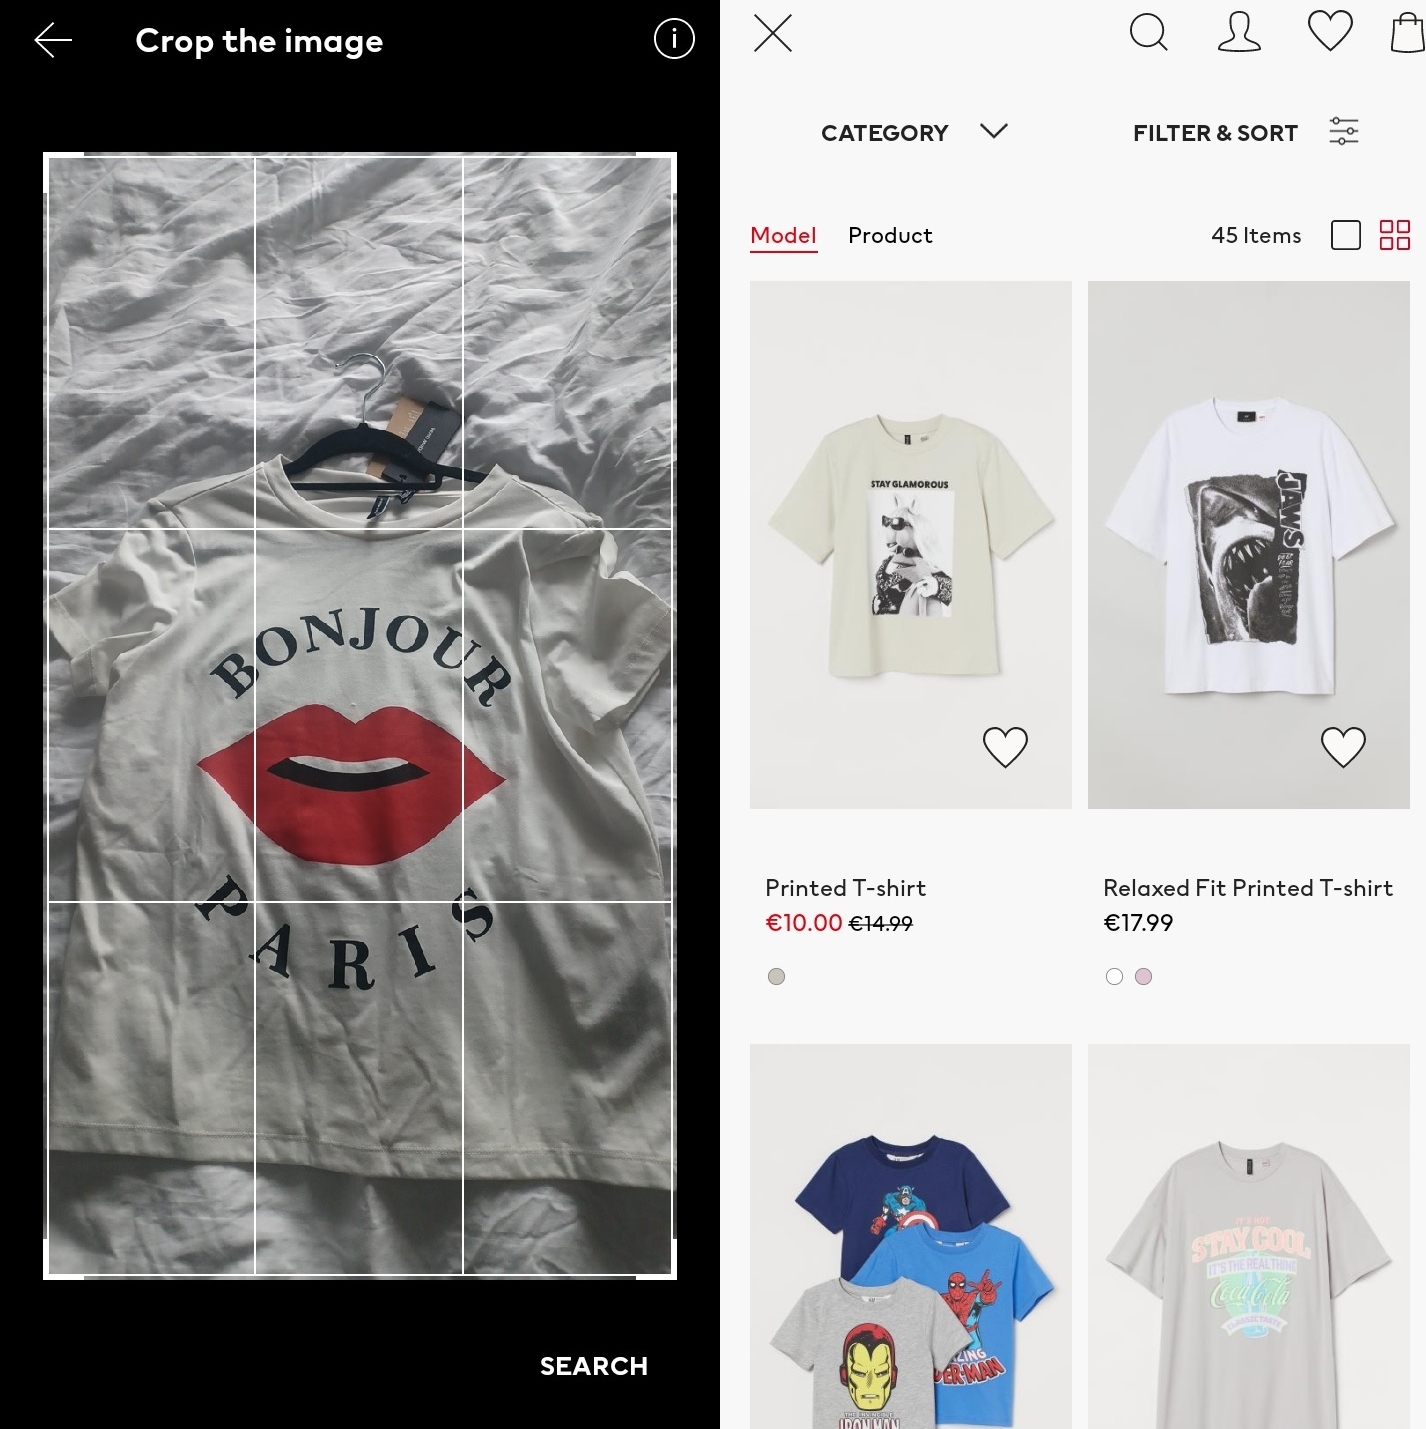 H&M visual search results